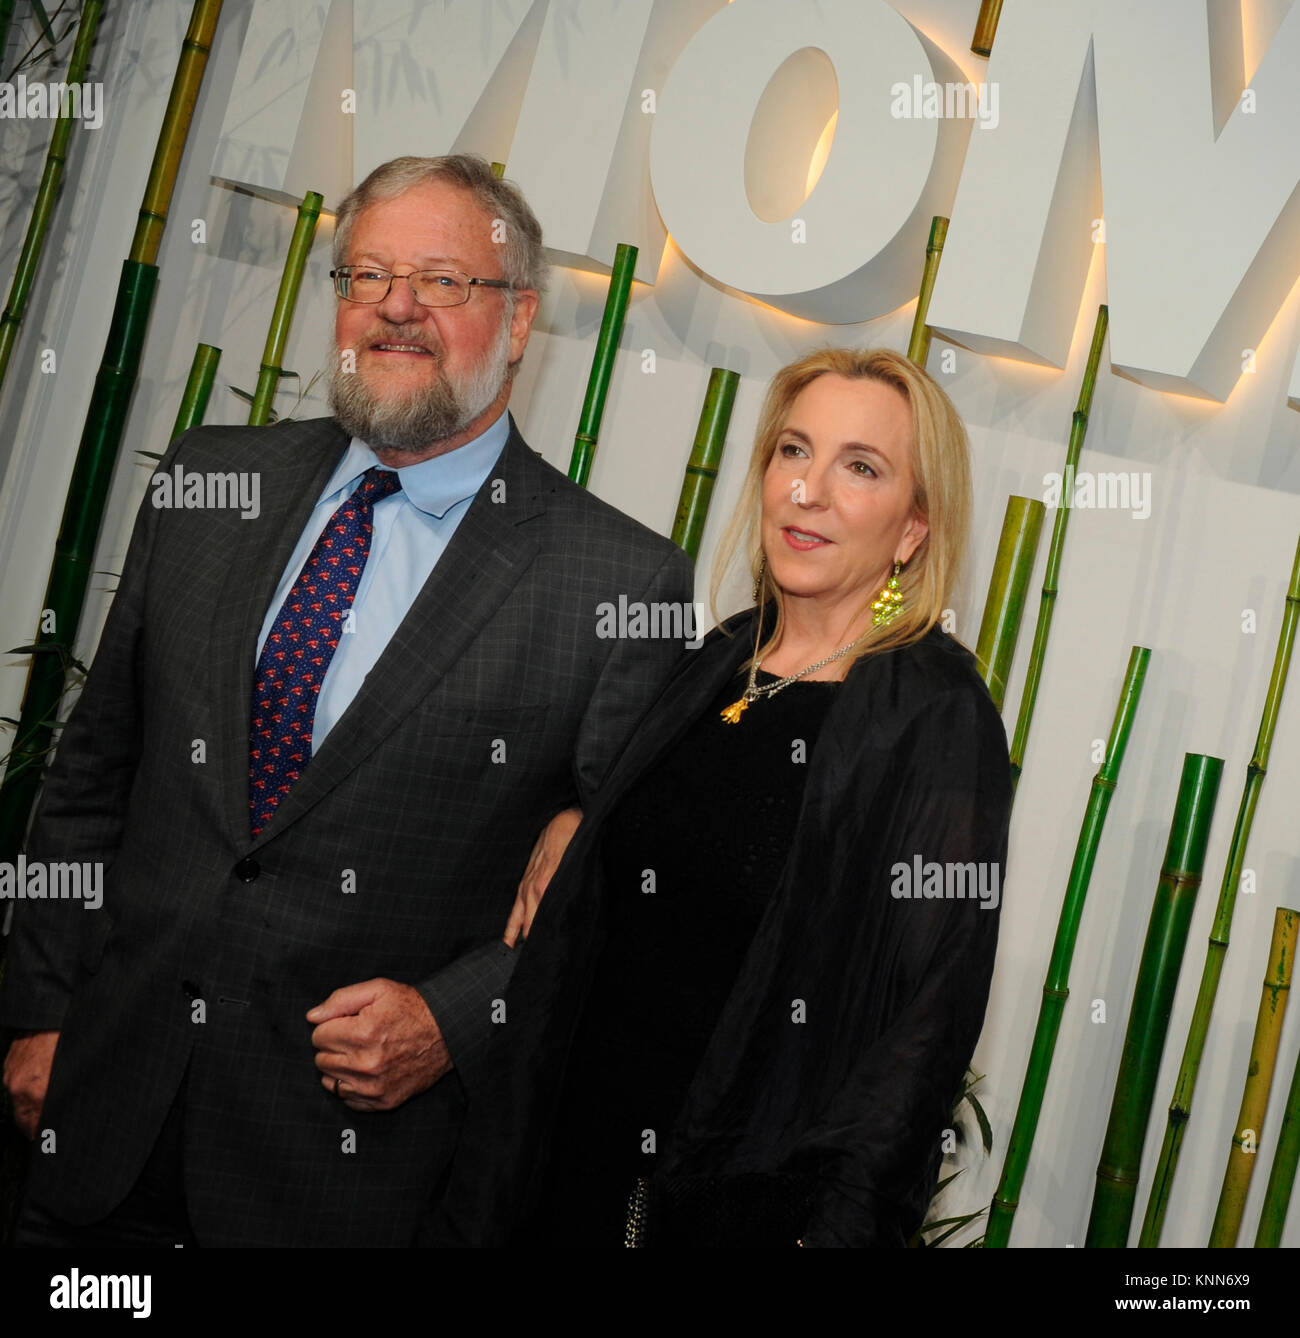 NEW YORK, NY - JUNE 02: David Rockefeller, Jr, Susan Rockefeller  attends the 2015 Museum of Modern Art Party In The Garden and special salute to David Rockefeller on his 100th Birthday at Museum of Modern Art on June 2, 2015 in New York City   People:  David Rockefeller, Jr, Susan Rockefeller Stock Photo